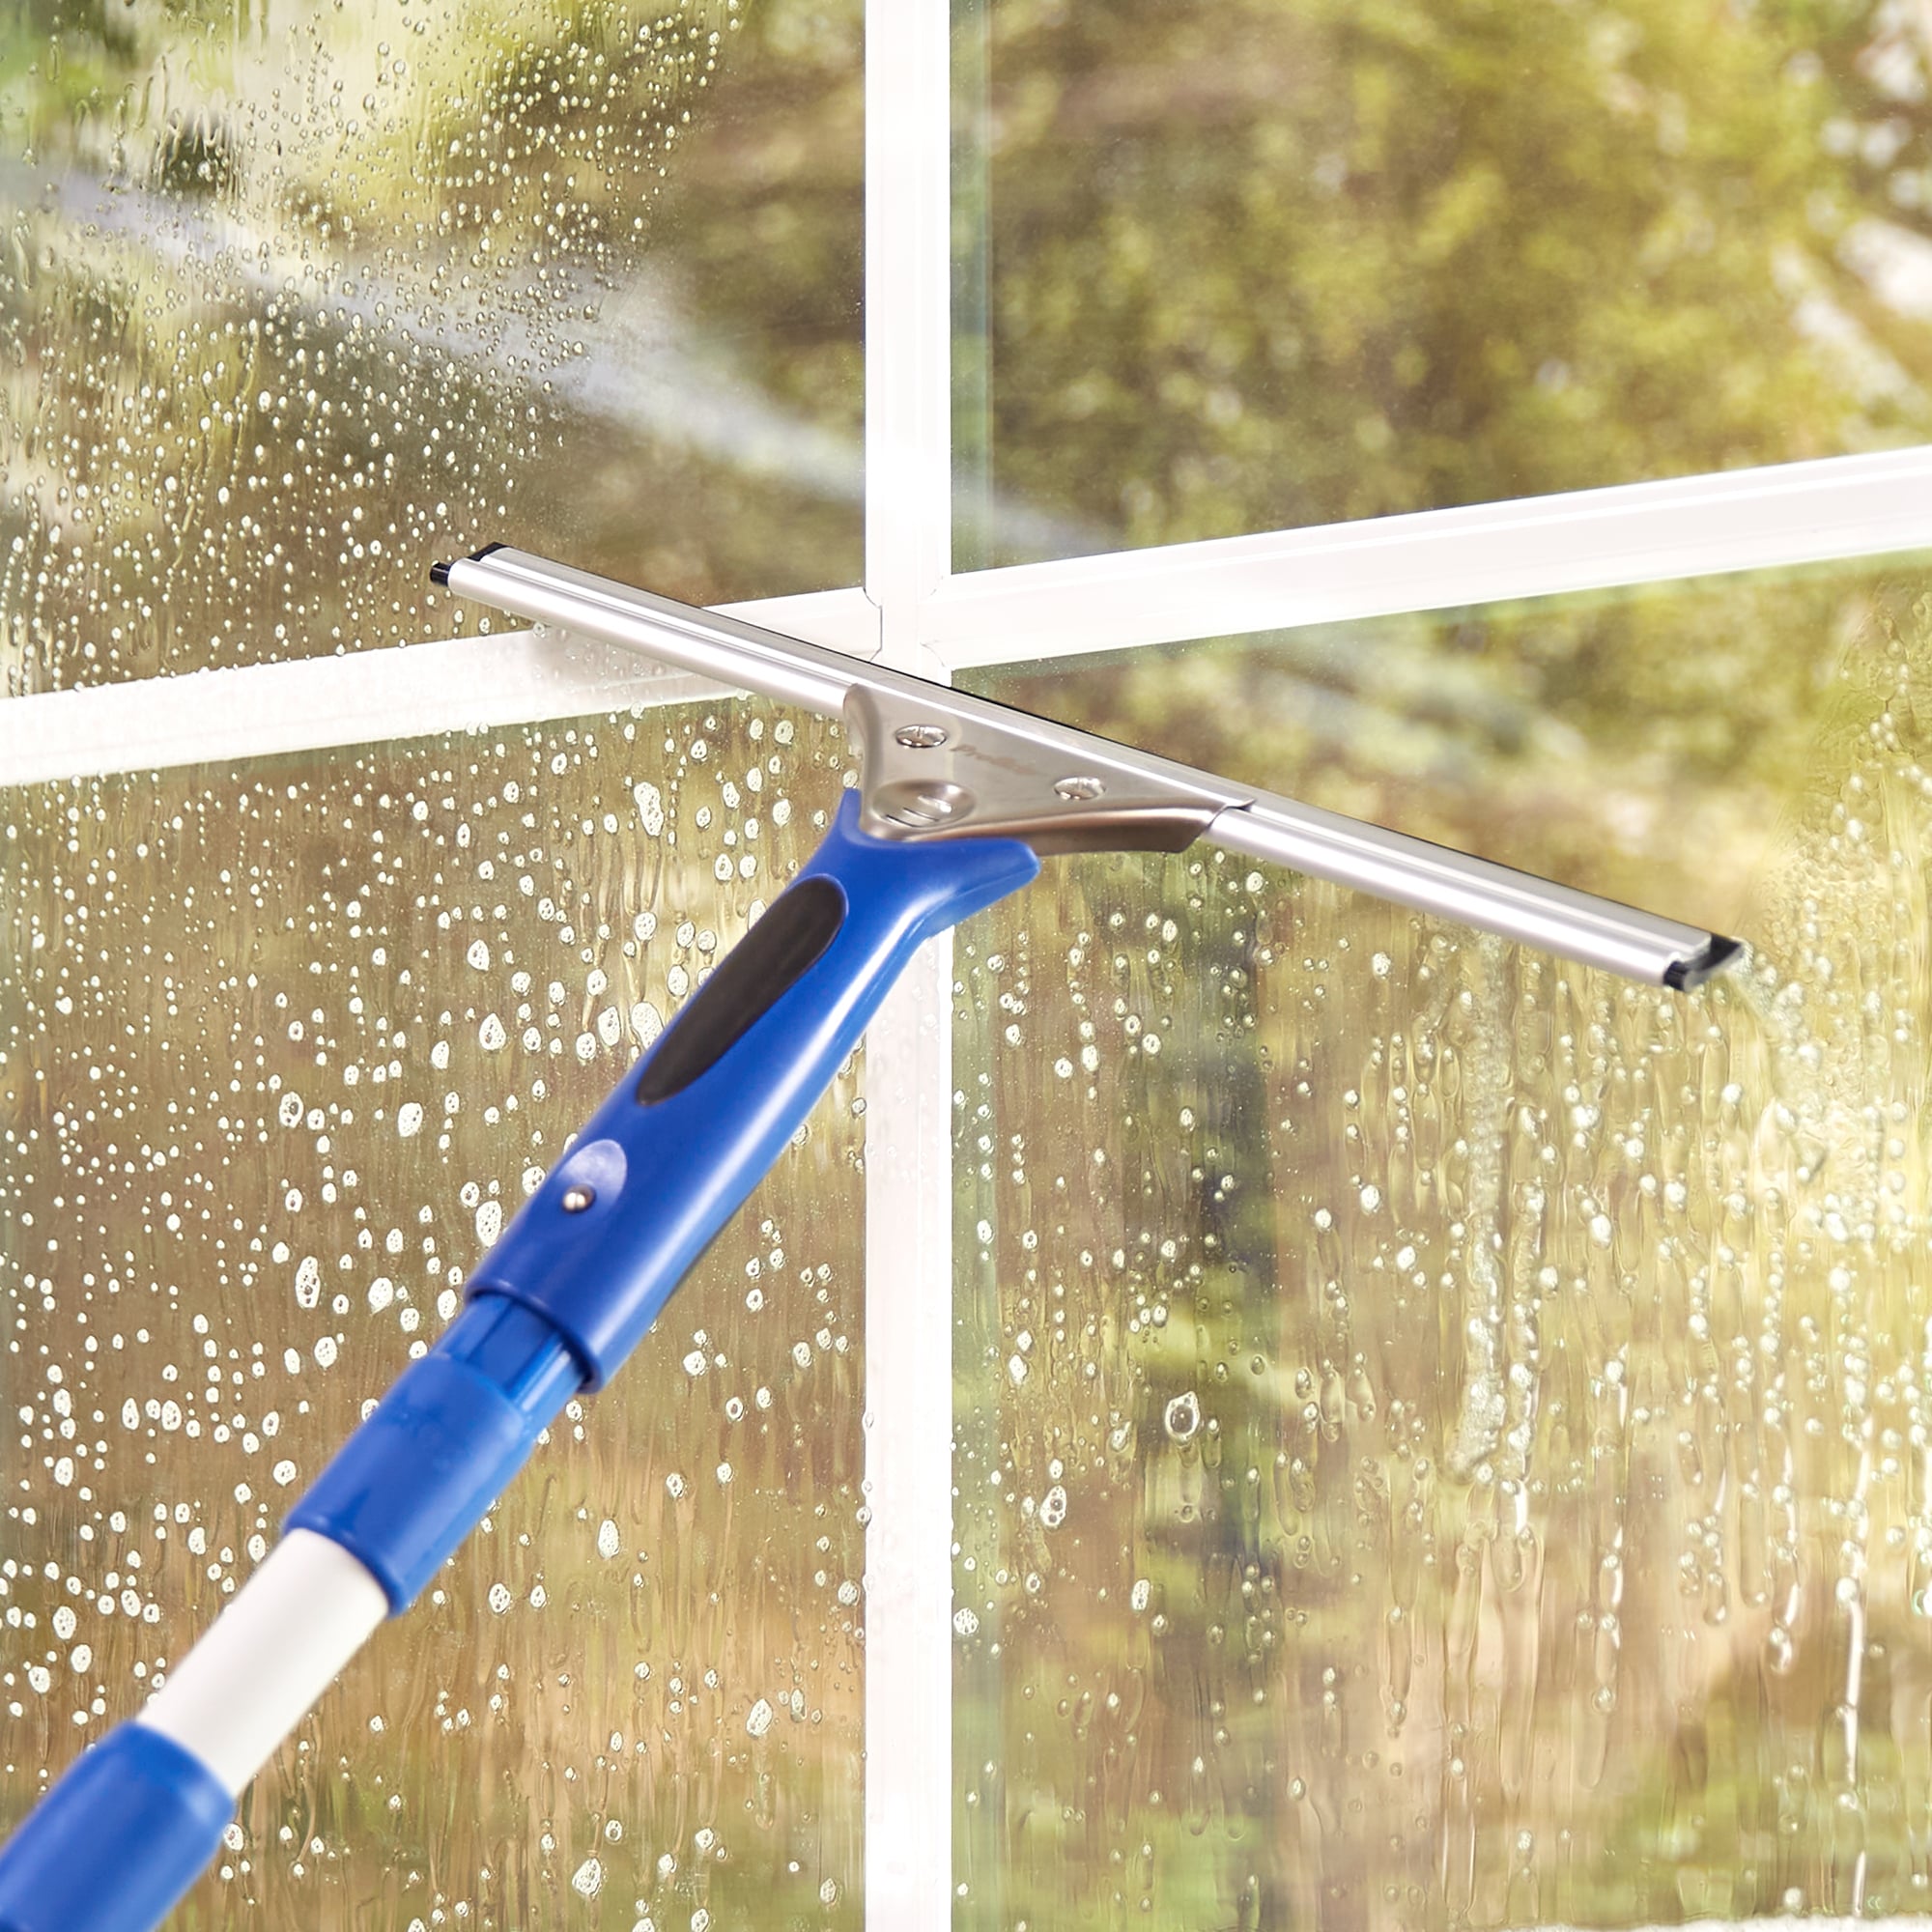 ProGrip Window Squeegee – Ettore Products Co